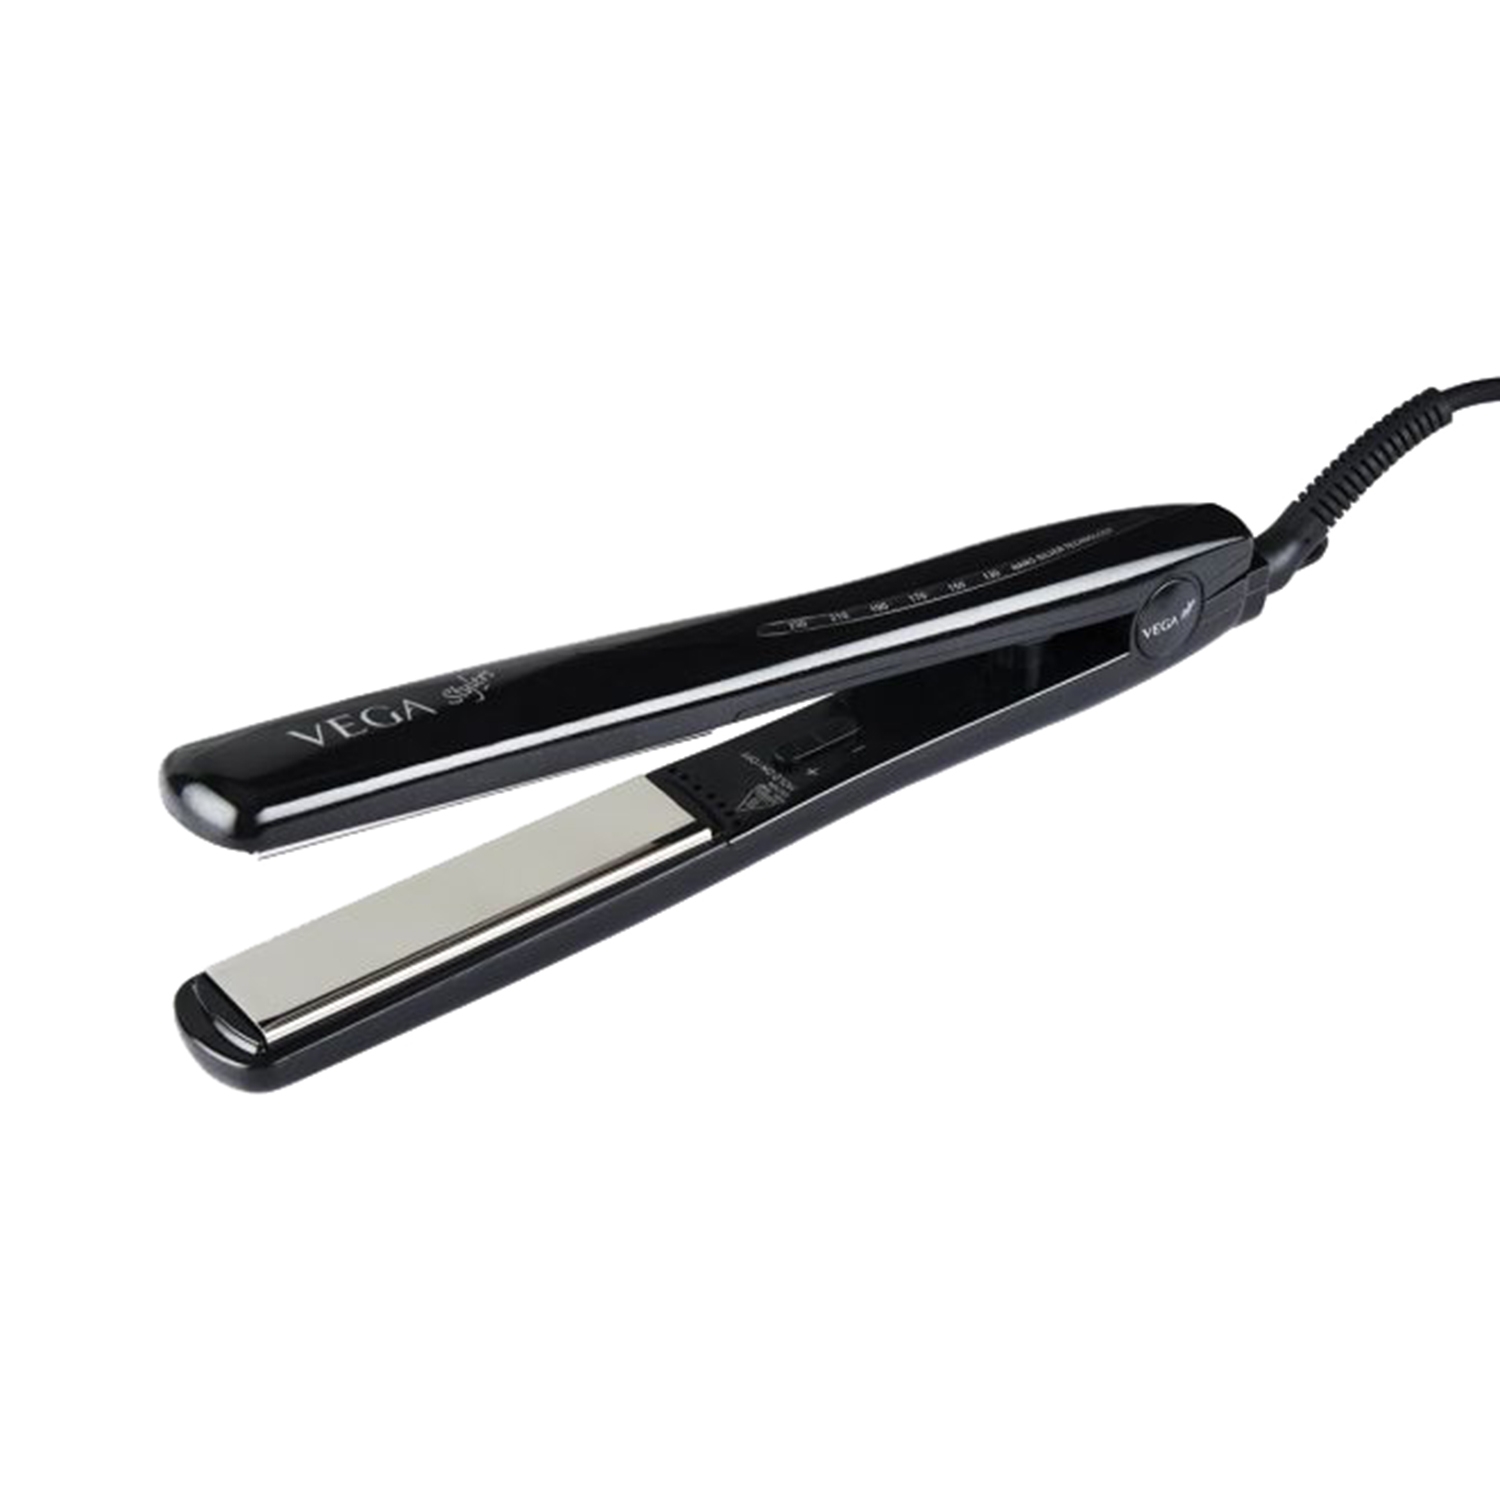 VEGA Hair Styling Combo Kit With Hair Straightener  Dryer VGGP08 Buy VEGA  Hair Styling Combo Kit With Hair Straightener  Dryer VGGP08 Online at  Best Price in India  Nykaa